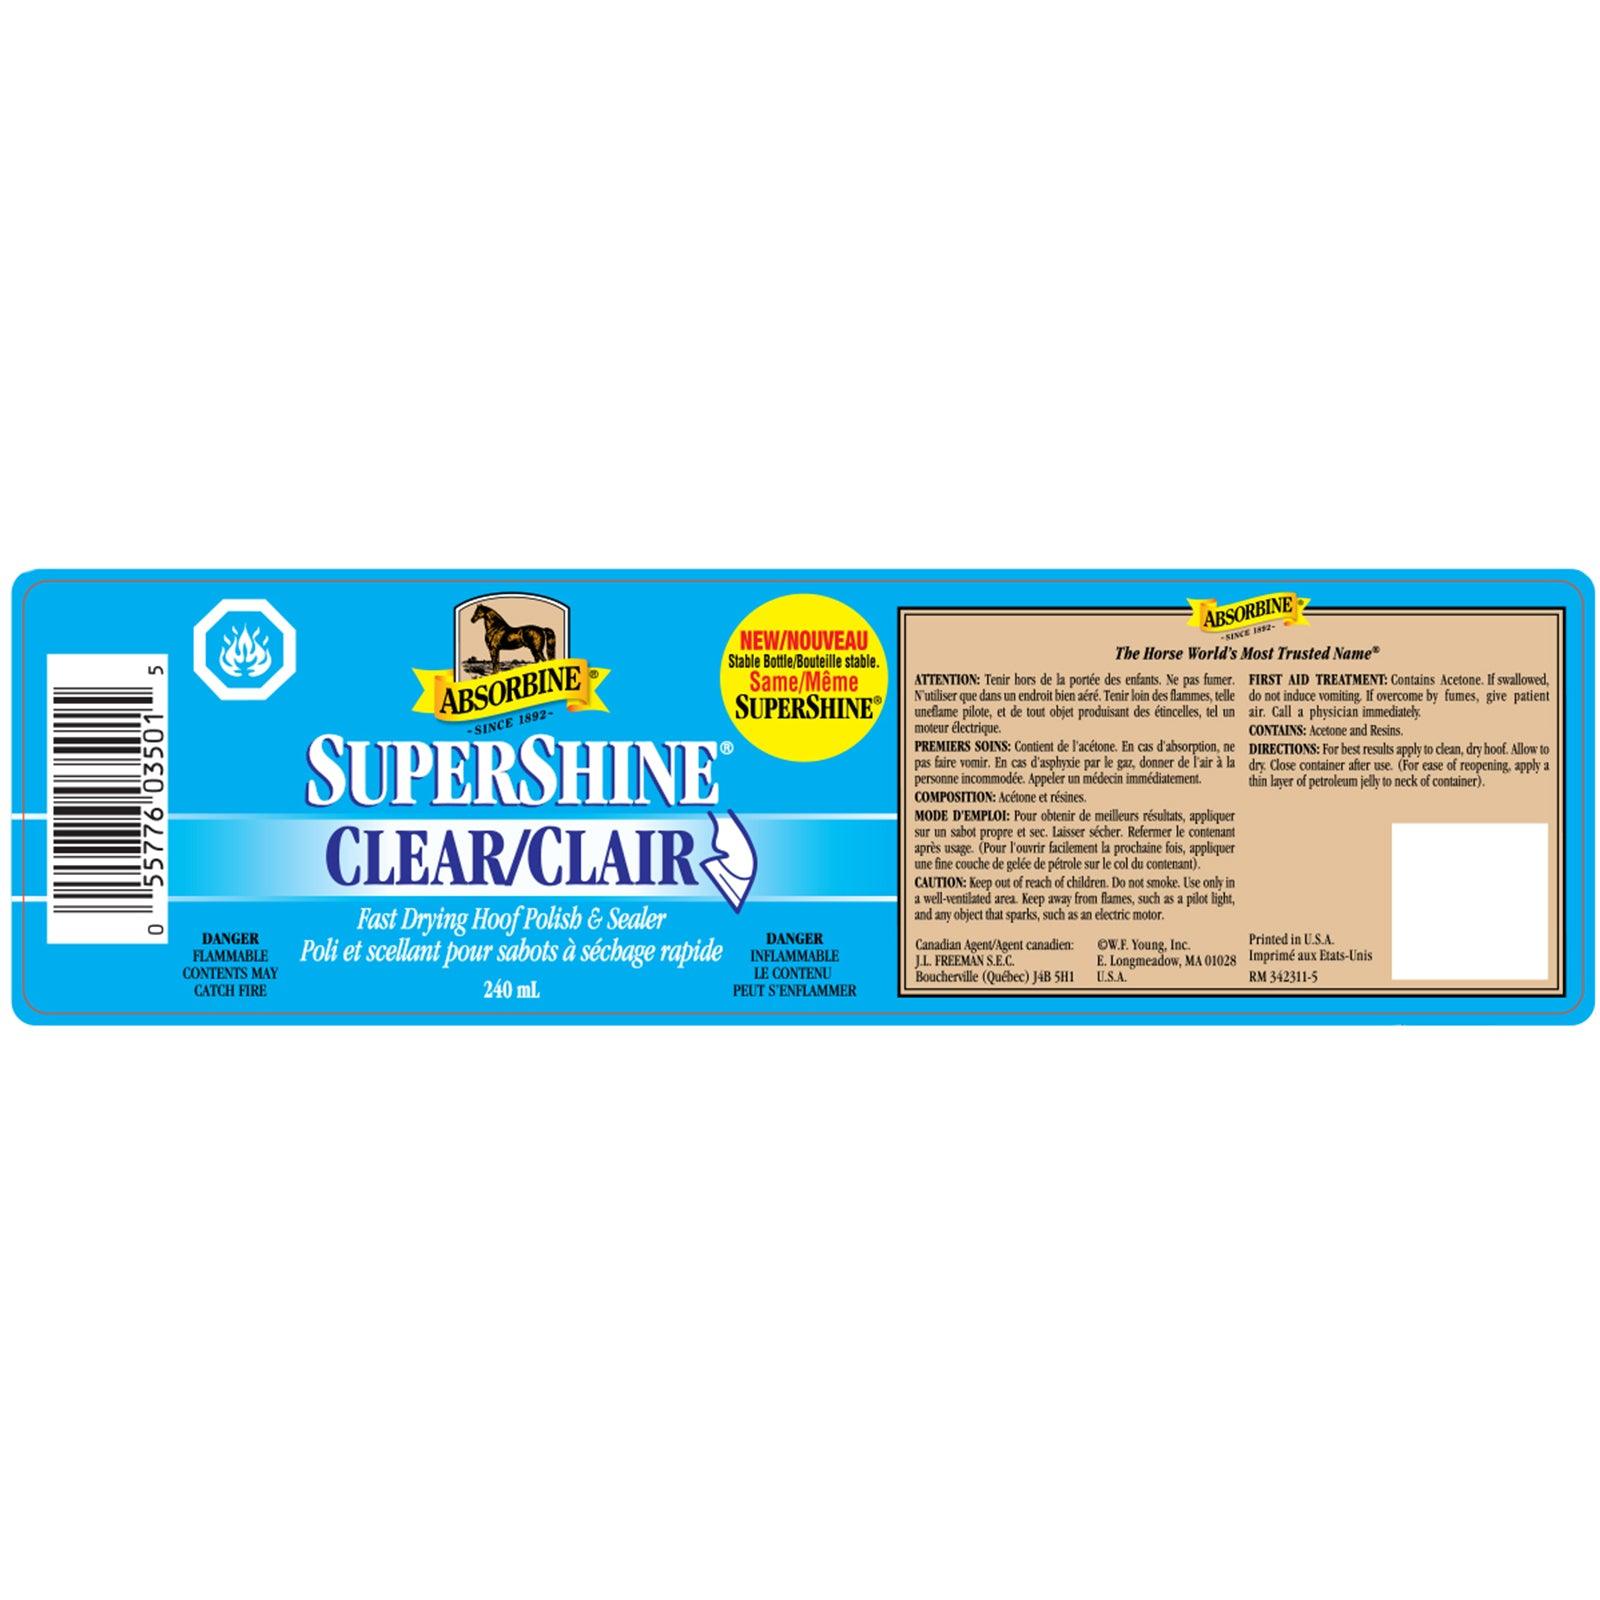 SuperShine Clear fast drying hoof polish & sealer 8 fluid ounce bottle wrap around label.